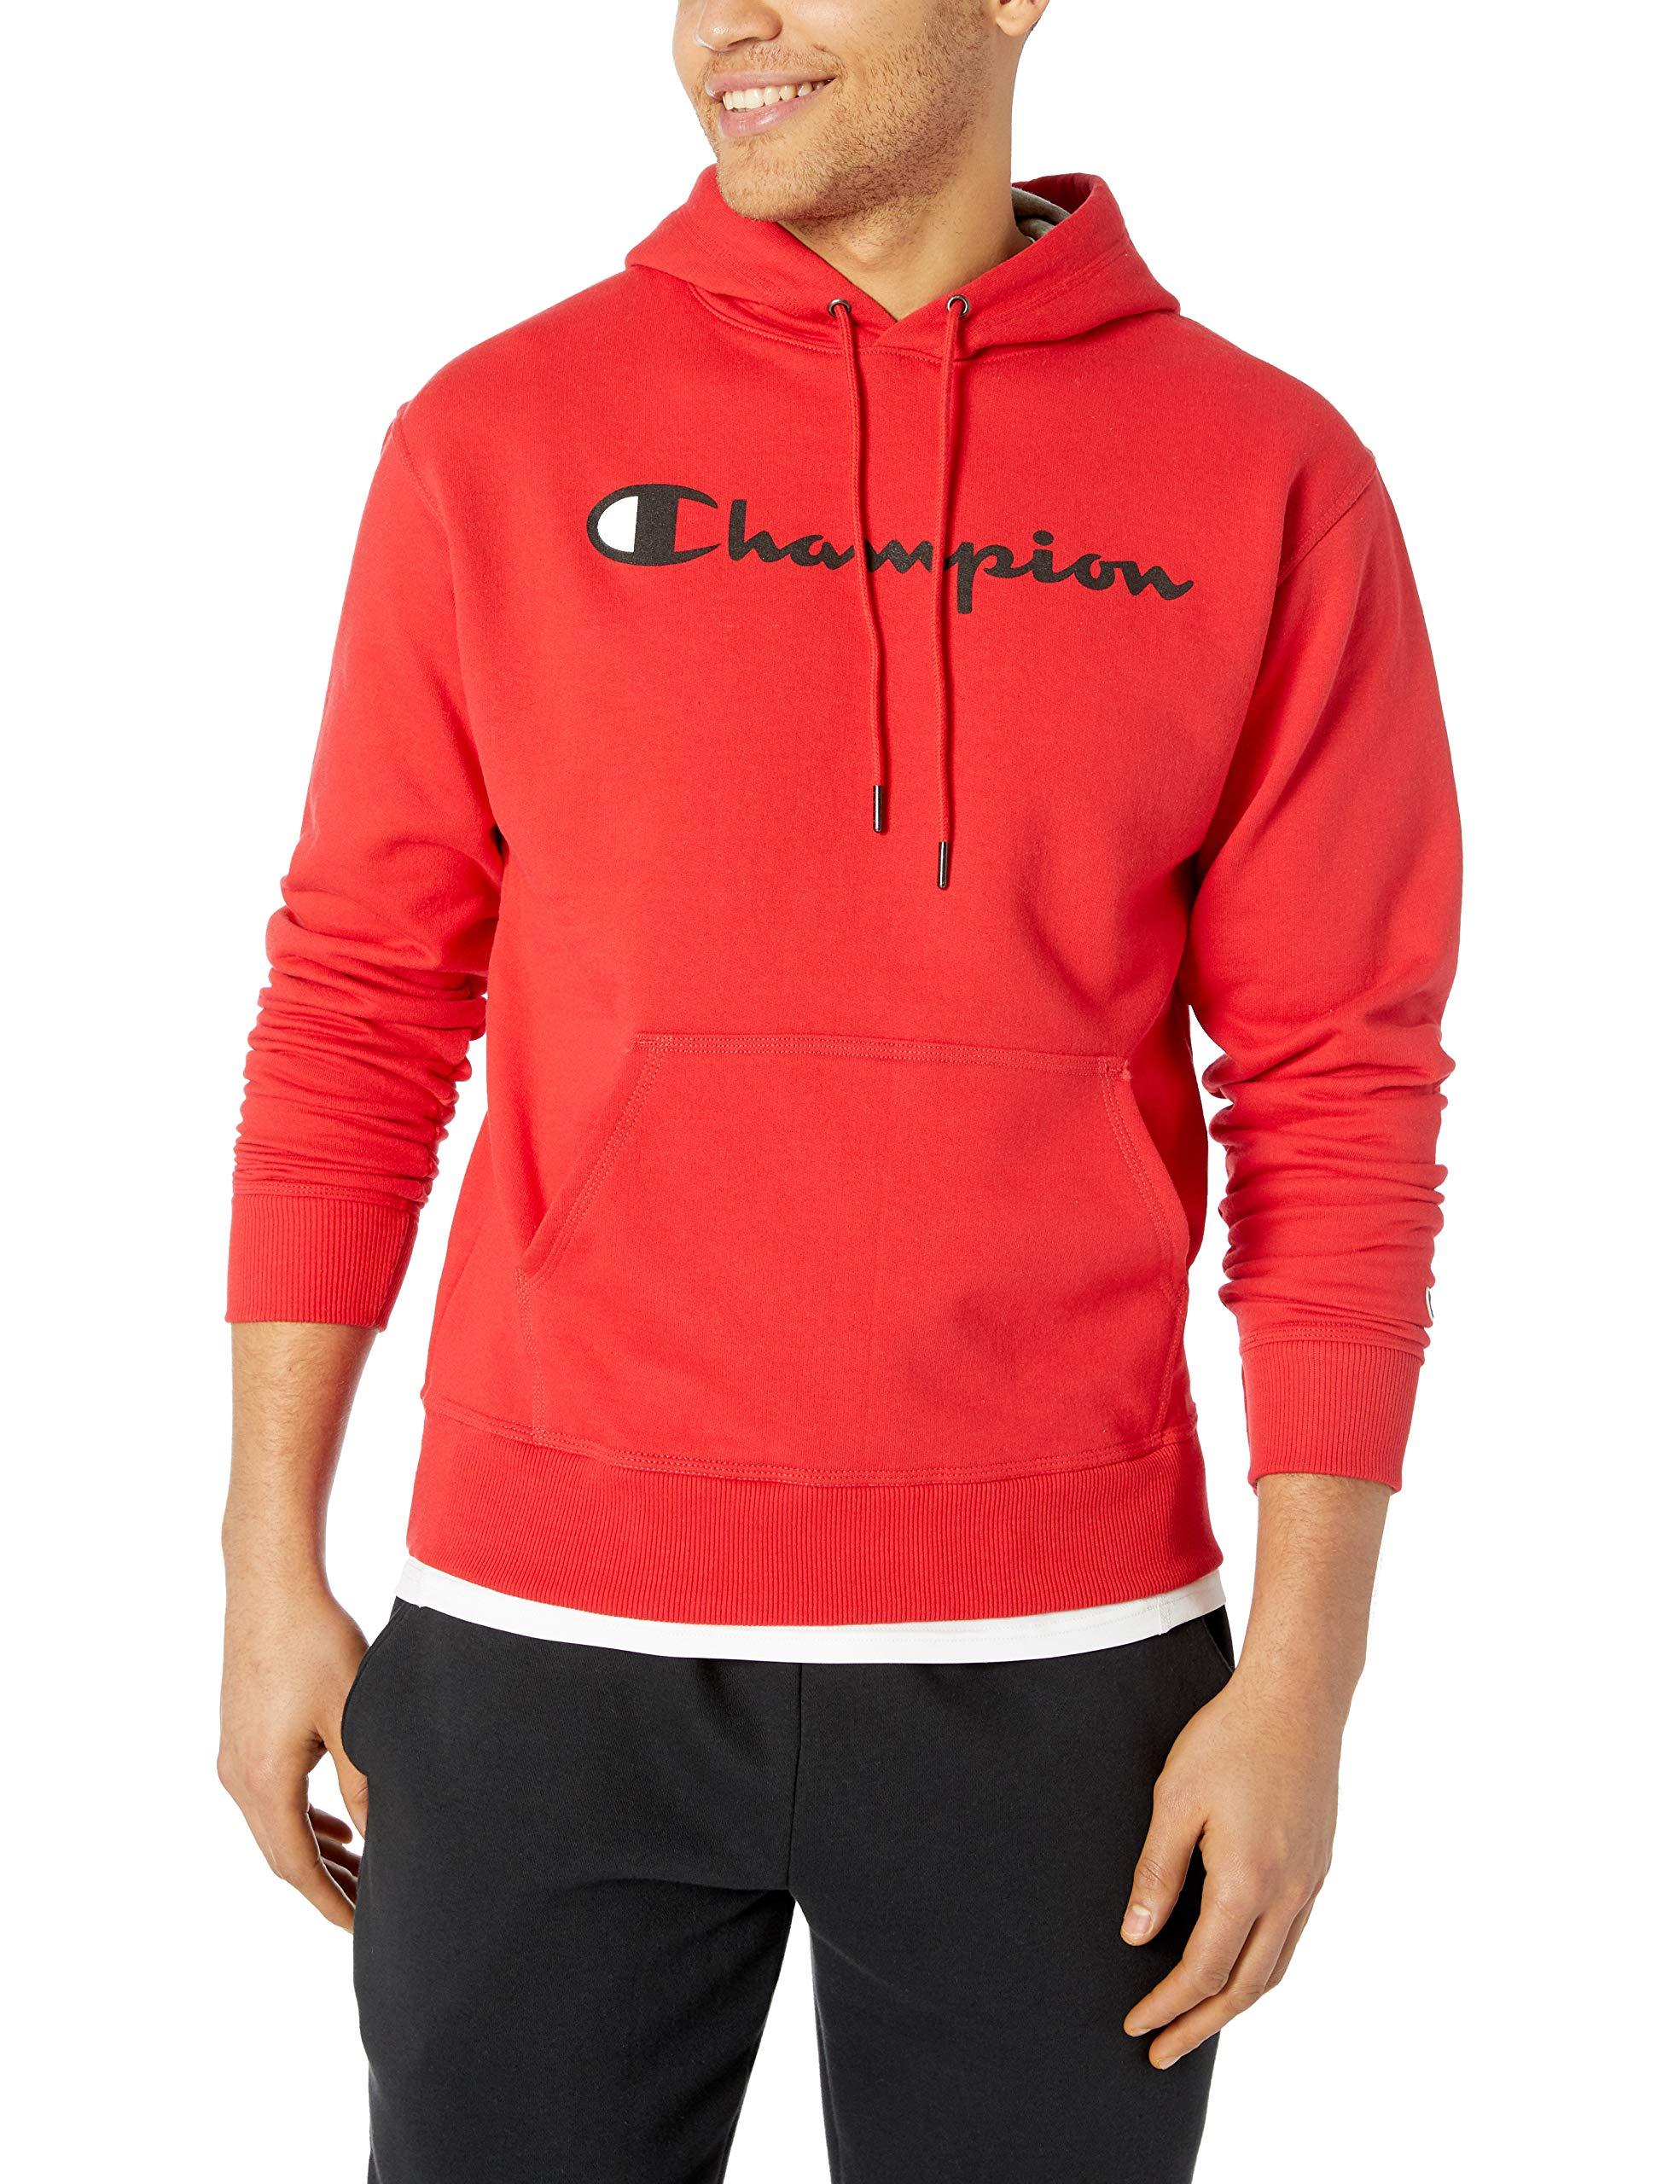 Champion Graphic Powerblend Fleece Hoodie in Red for Men - Save 8% - Lyst